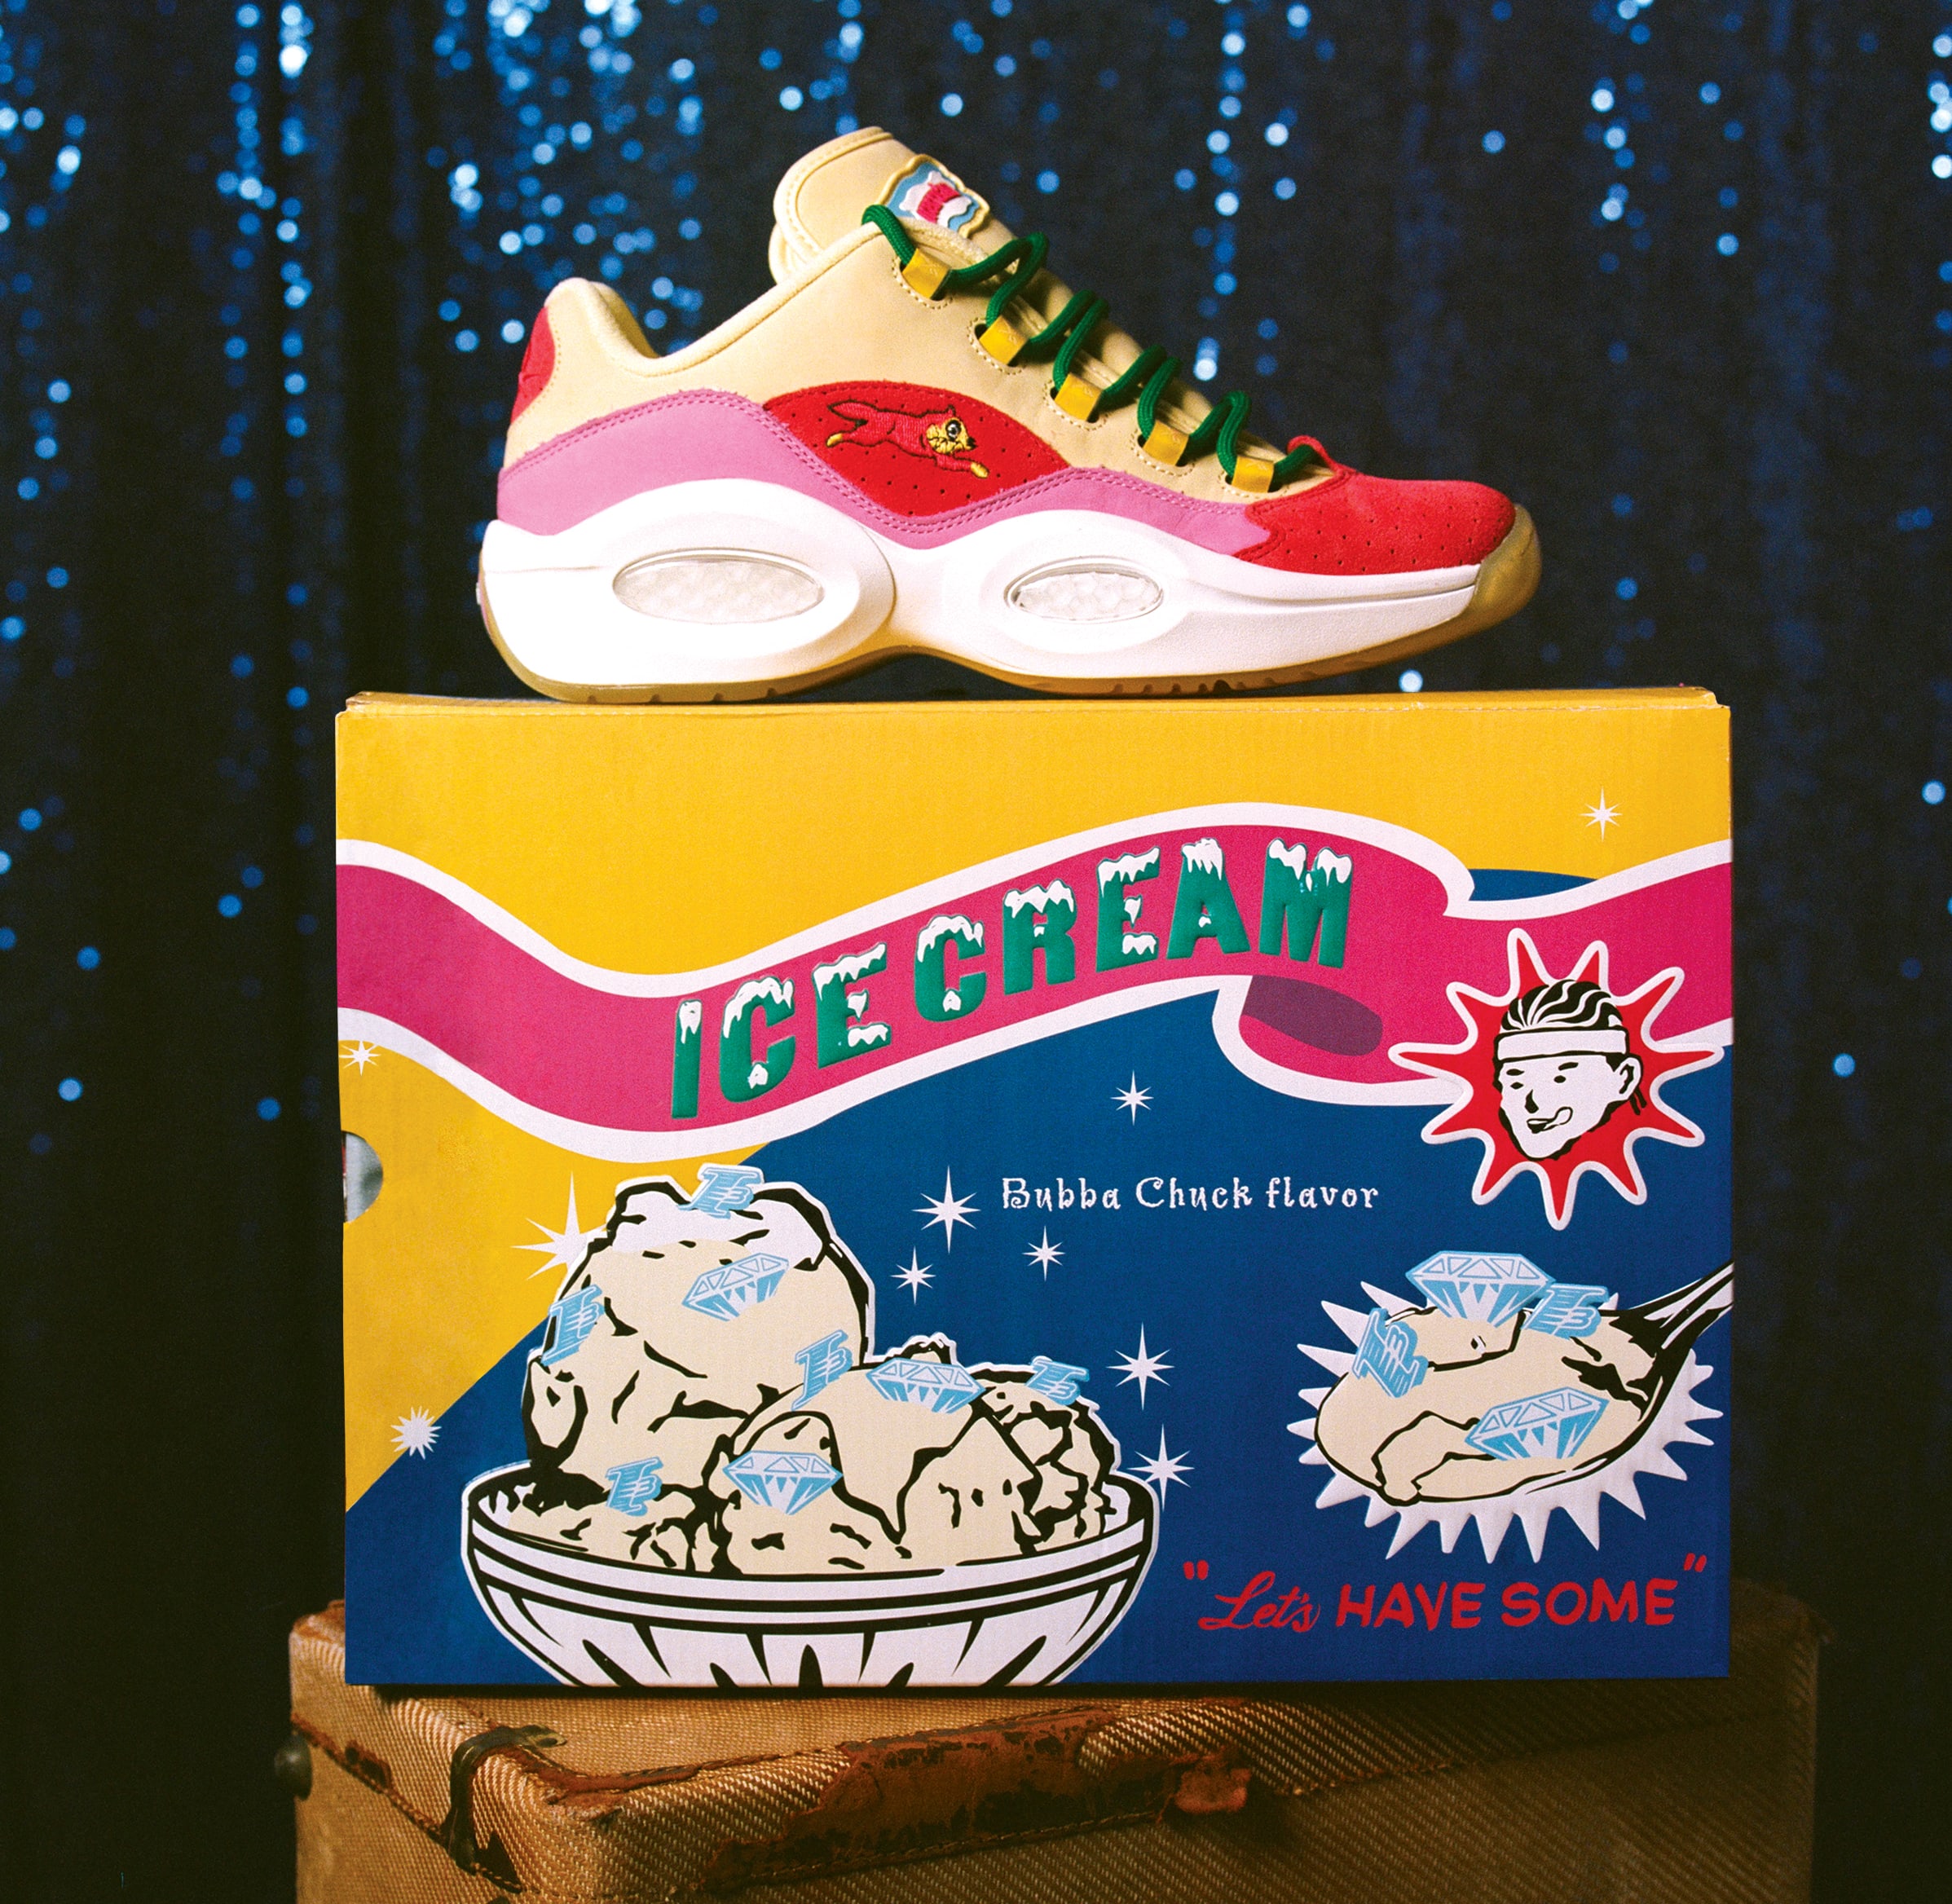 BBC Icecream x Reebok Question Low &#x27;Running Dog&#x27; Yellow/Red/Pink FZ4346 Lateral